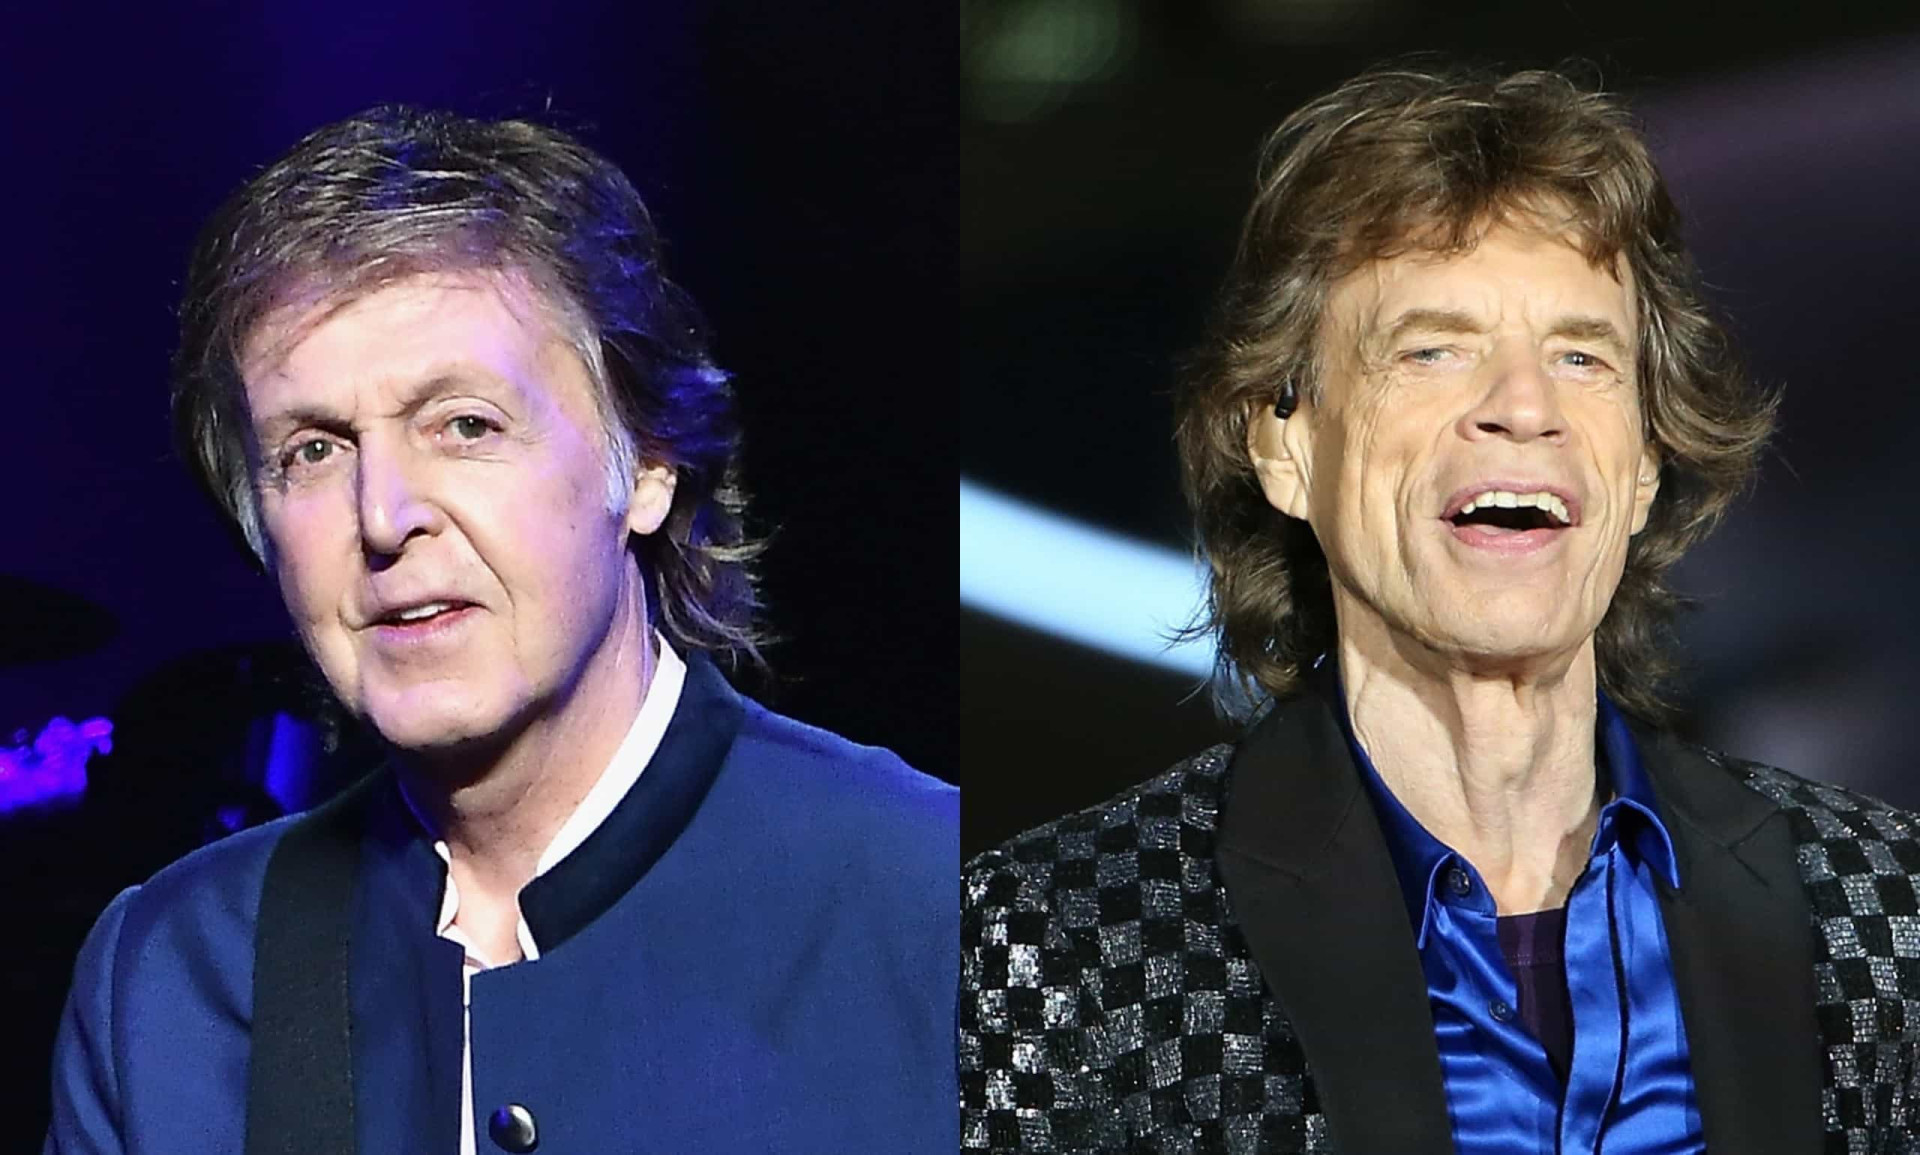 <p>In a 2021 interview with The New Yorker, Paul McCartney made a surprising comment about The Rolling Stones, saying "I’m not sure I should say it, but they’re a blues cover band, that’s sort of what the Stones are." Ouch! “I think our net was cast a bit wider than theirs.” Weeks later, Mick Jagger responded to the comments on Zane Lowe’s Apple Music show and said that the real difference is that "The Rolling Stones is a big concert band in other decades and other areas when the Beatles never even did an arena tour, or Madison Square Garden with a decent sound system.” Jagger clarified, "One band is unbelievably luckily, still playing in stadiums and then the other band doesn’t exist." </p><p><a href="https://www.msn.com/en-us/community/channel/vid-7xx8mnucu55yw63we9va2gwr7uihbxwc68fxqp25x6tg4ftibpra?cvid=94631541bc0f4f89bfd59158d696ad7e">Follow us and access great exclusive content every day</a></p>